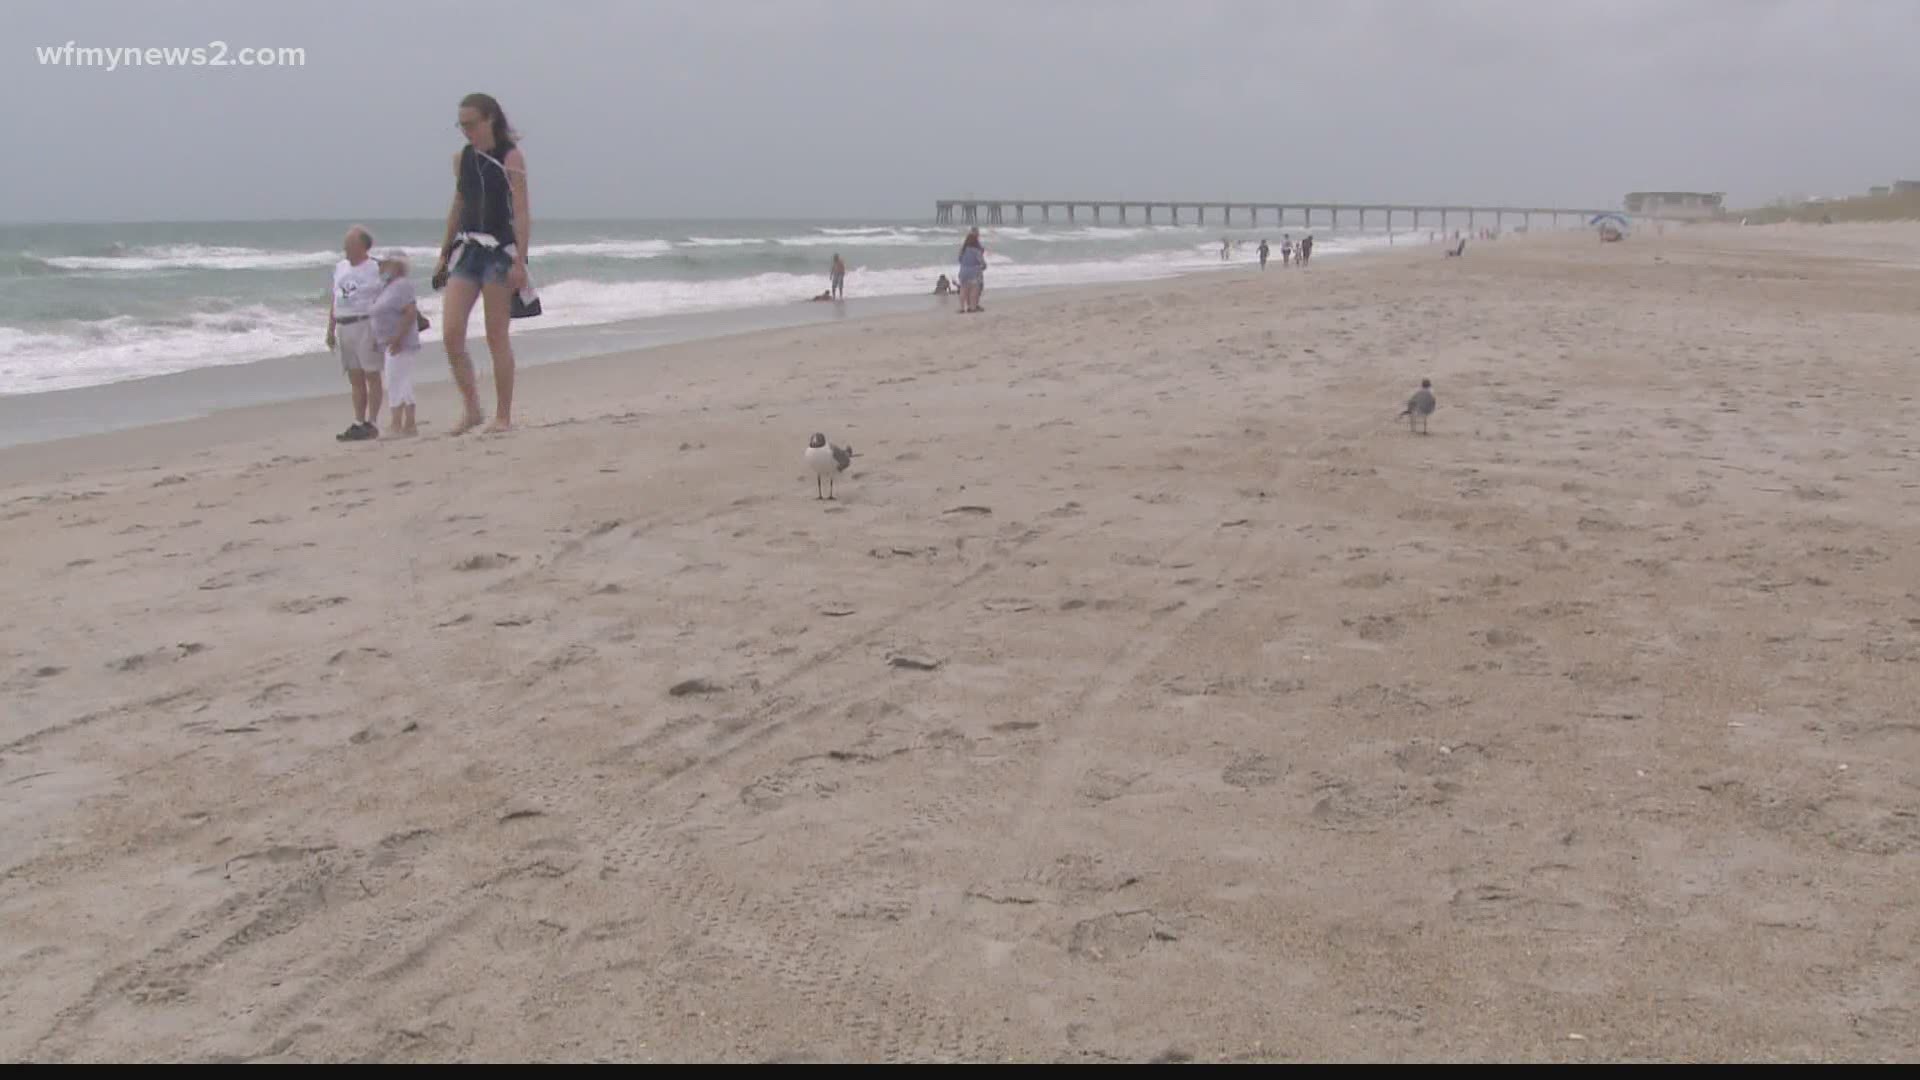 The storm didn’t scare everyone away from Wrightsville Beach. Many hope to be back out again, once Isaias passes.